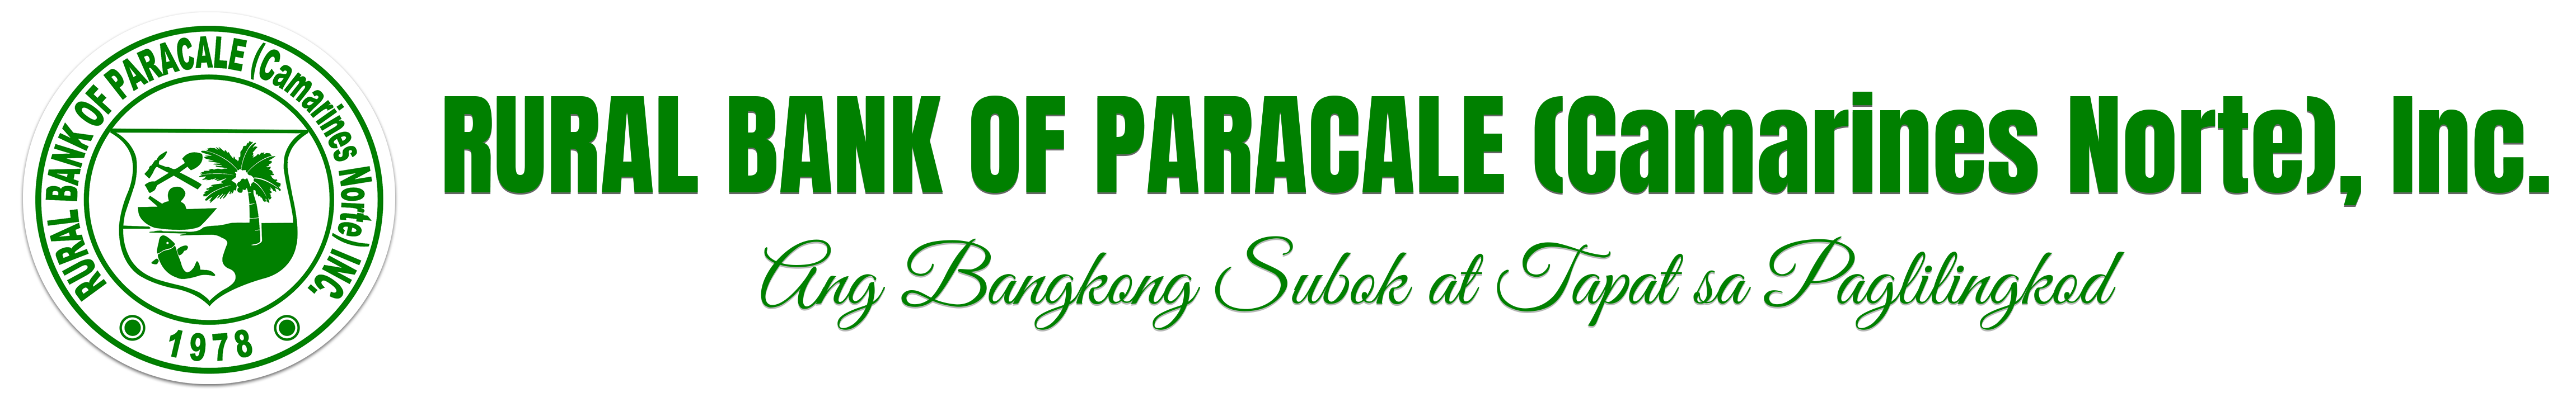 RURAL BANK OF PARACALE (CN), INC.